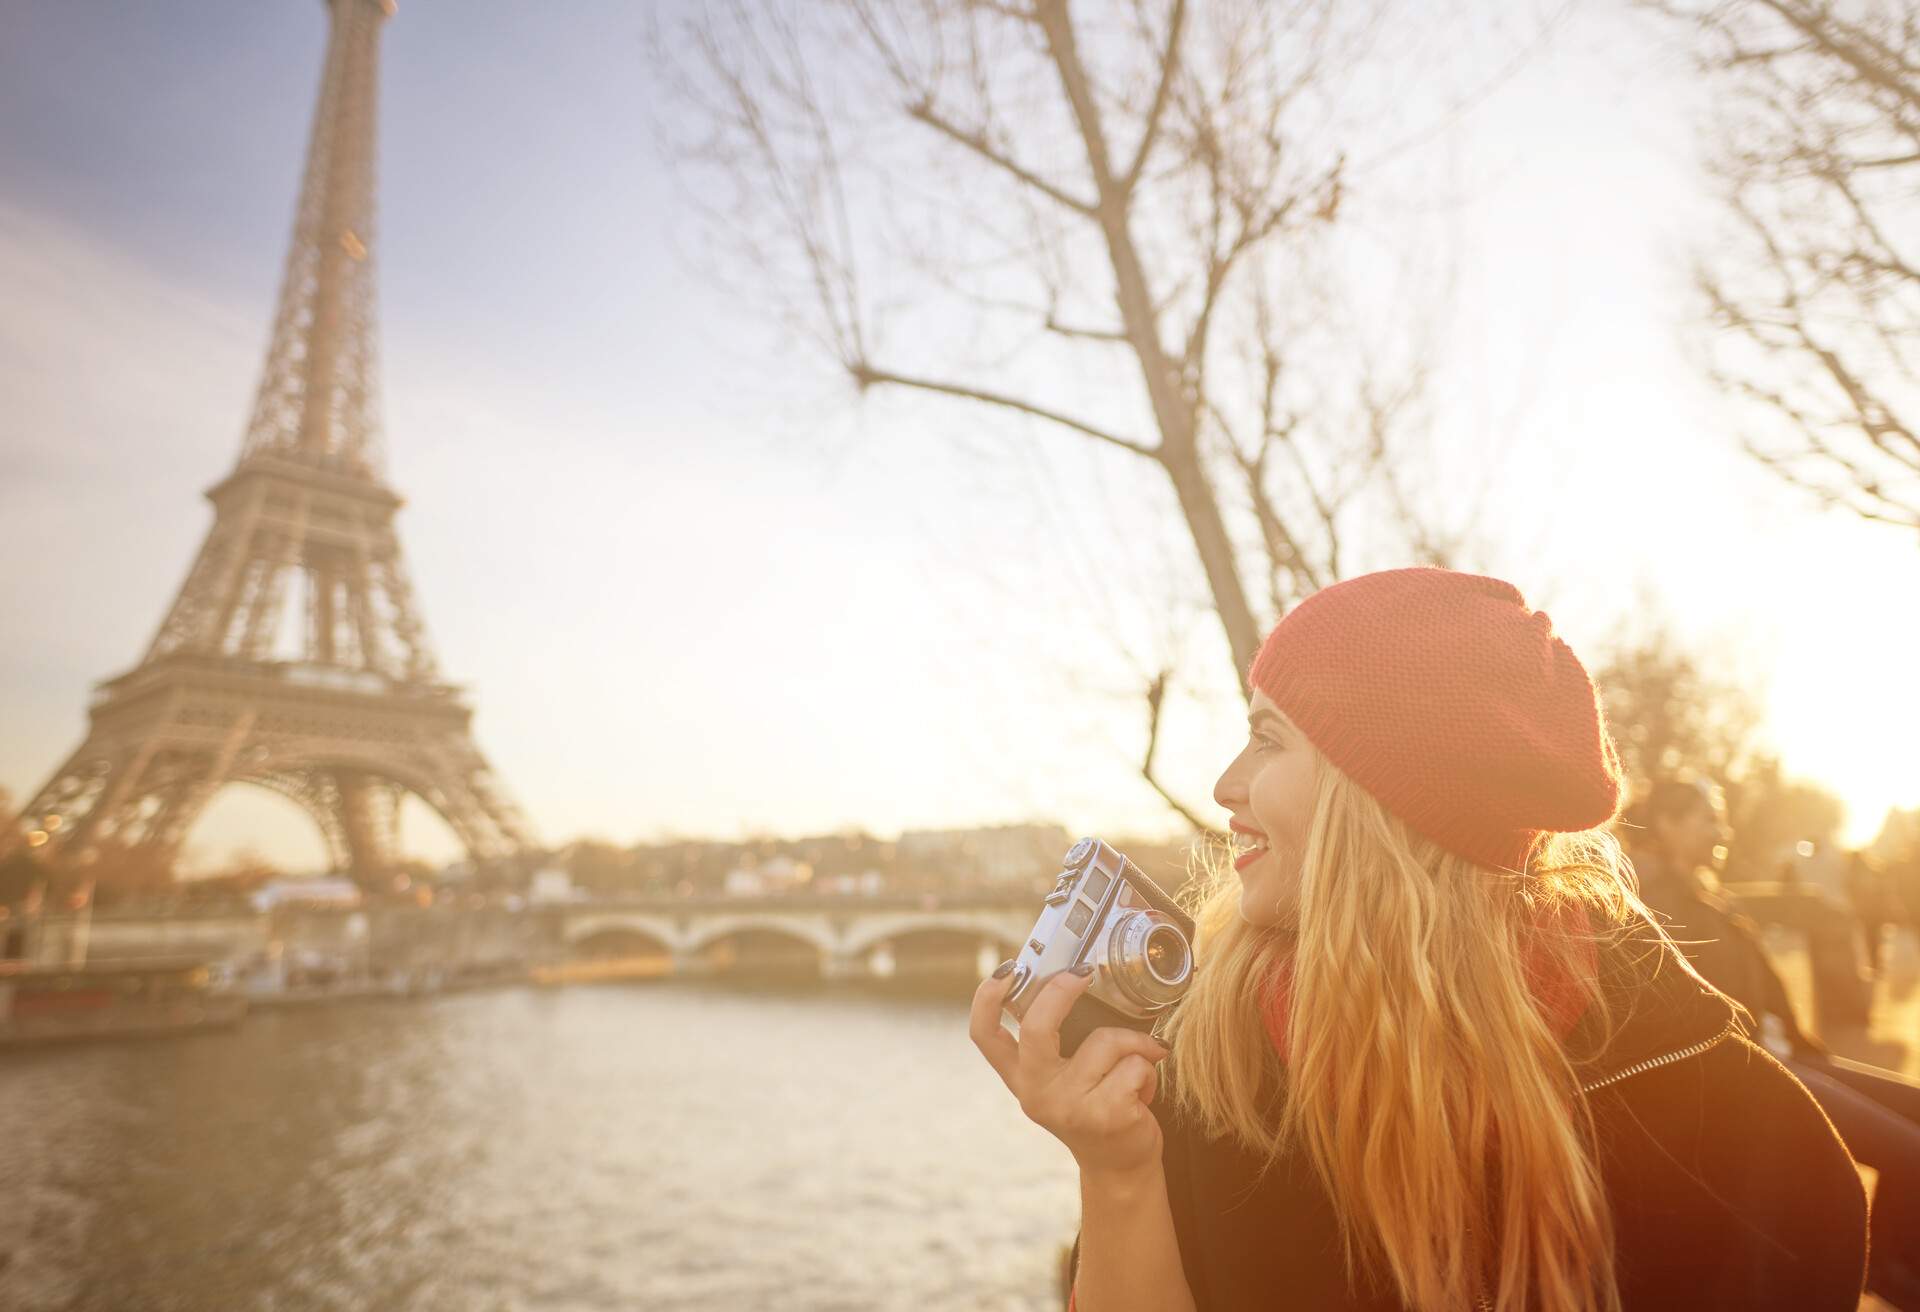 A woman with a camera smiling as she looks towards the Eiffel Tower from across the river.